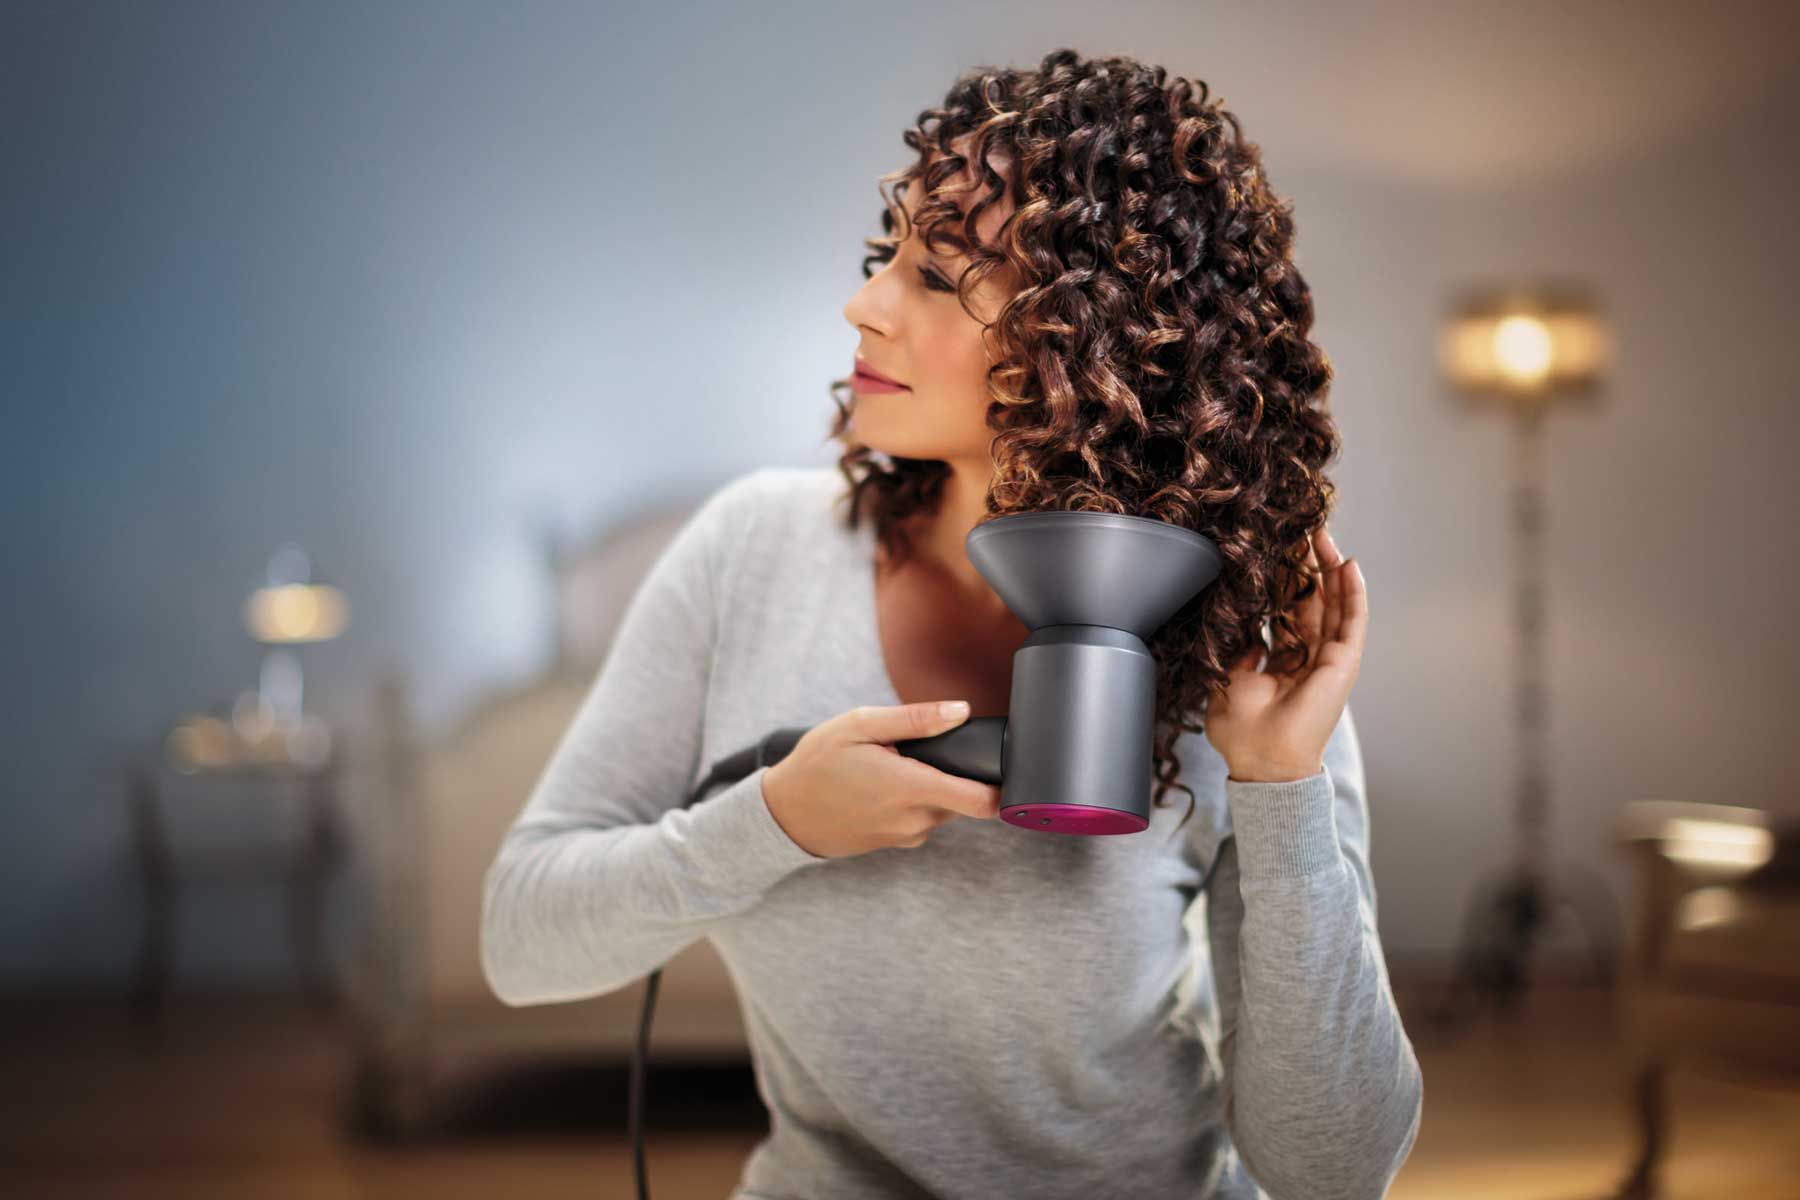 Dyson Hair Dryer — Introducing the New Dyson Supersonic Blow Dryer